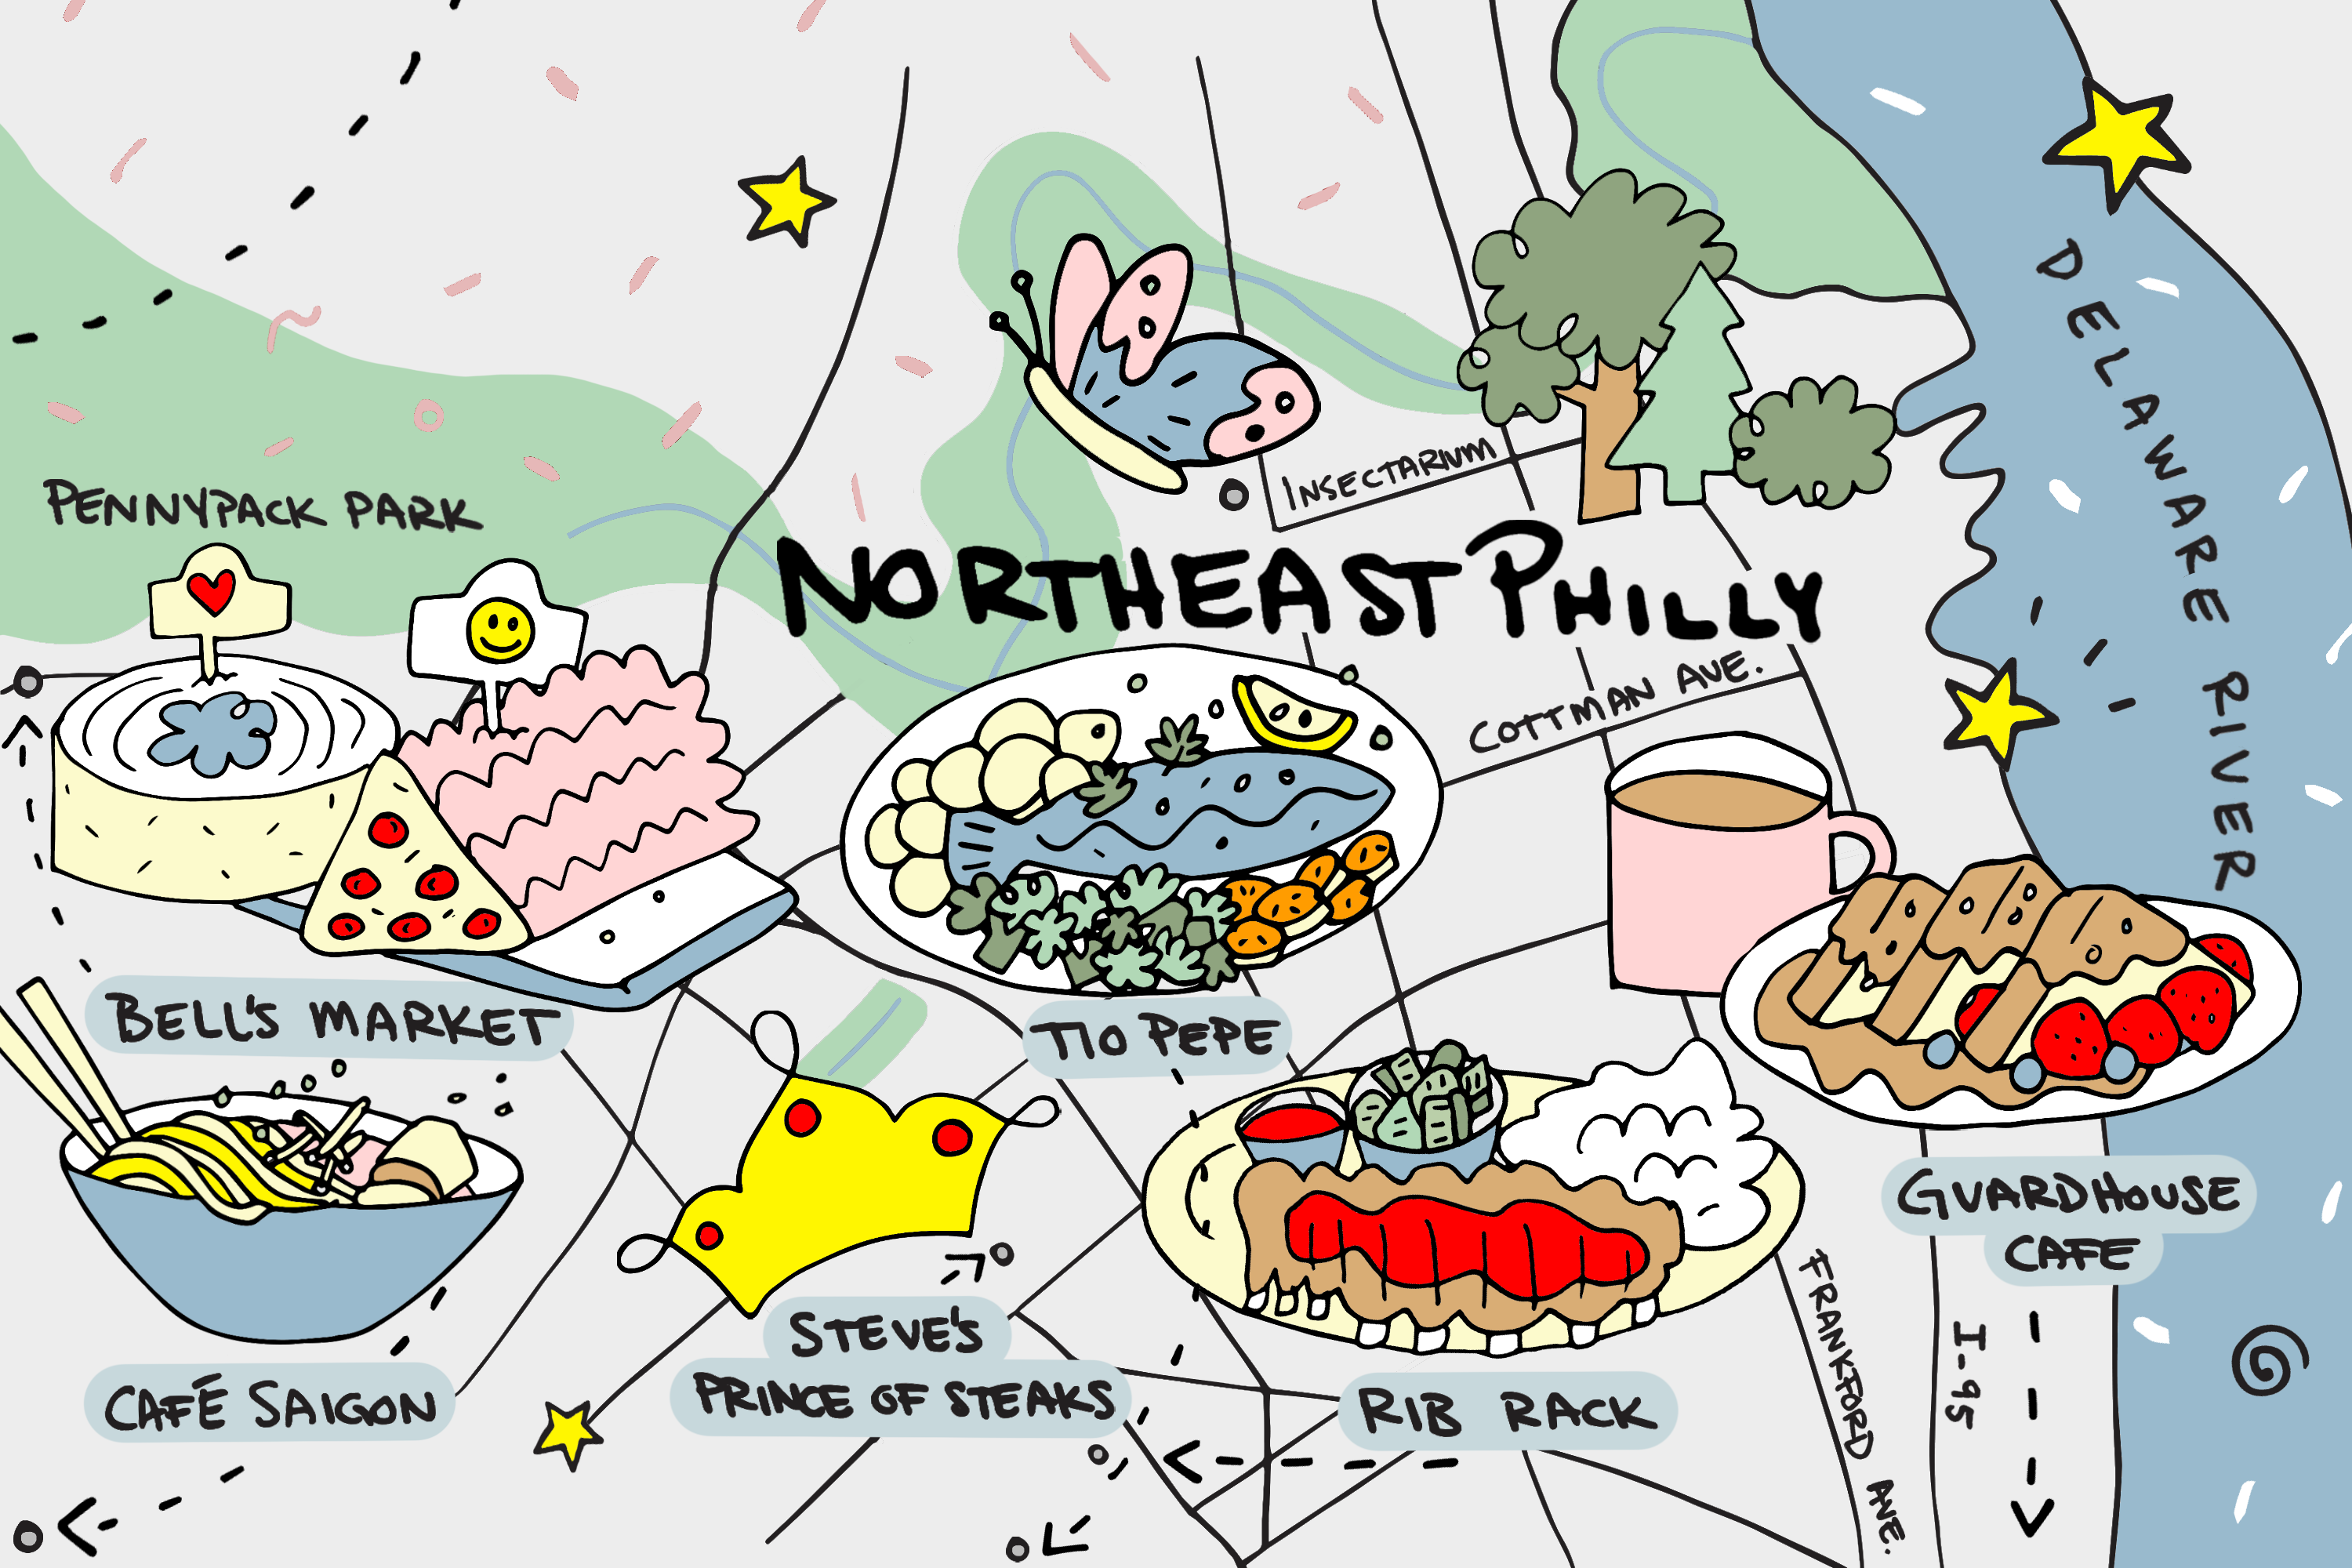 A drawing of the Northeastern map of Philly featuring Steve’s Prince of Steaks, Rib Rack, and more. 